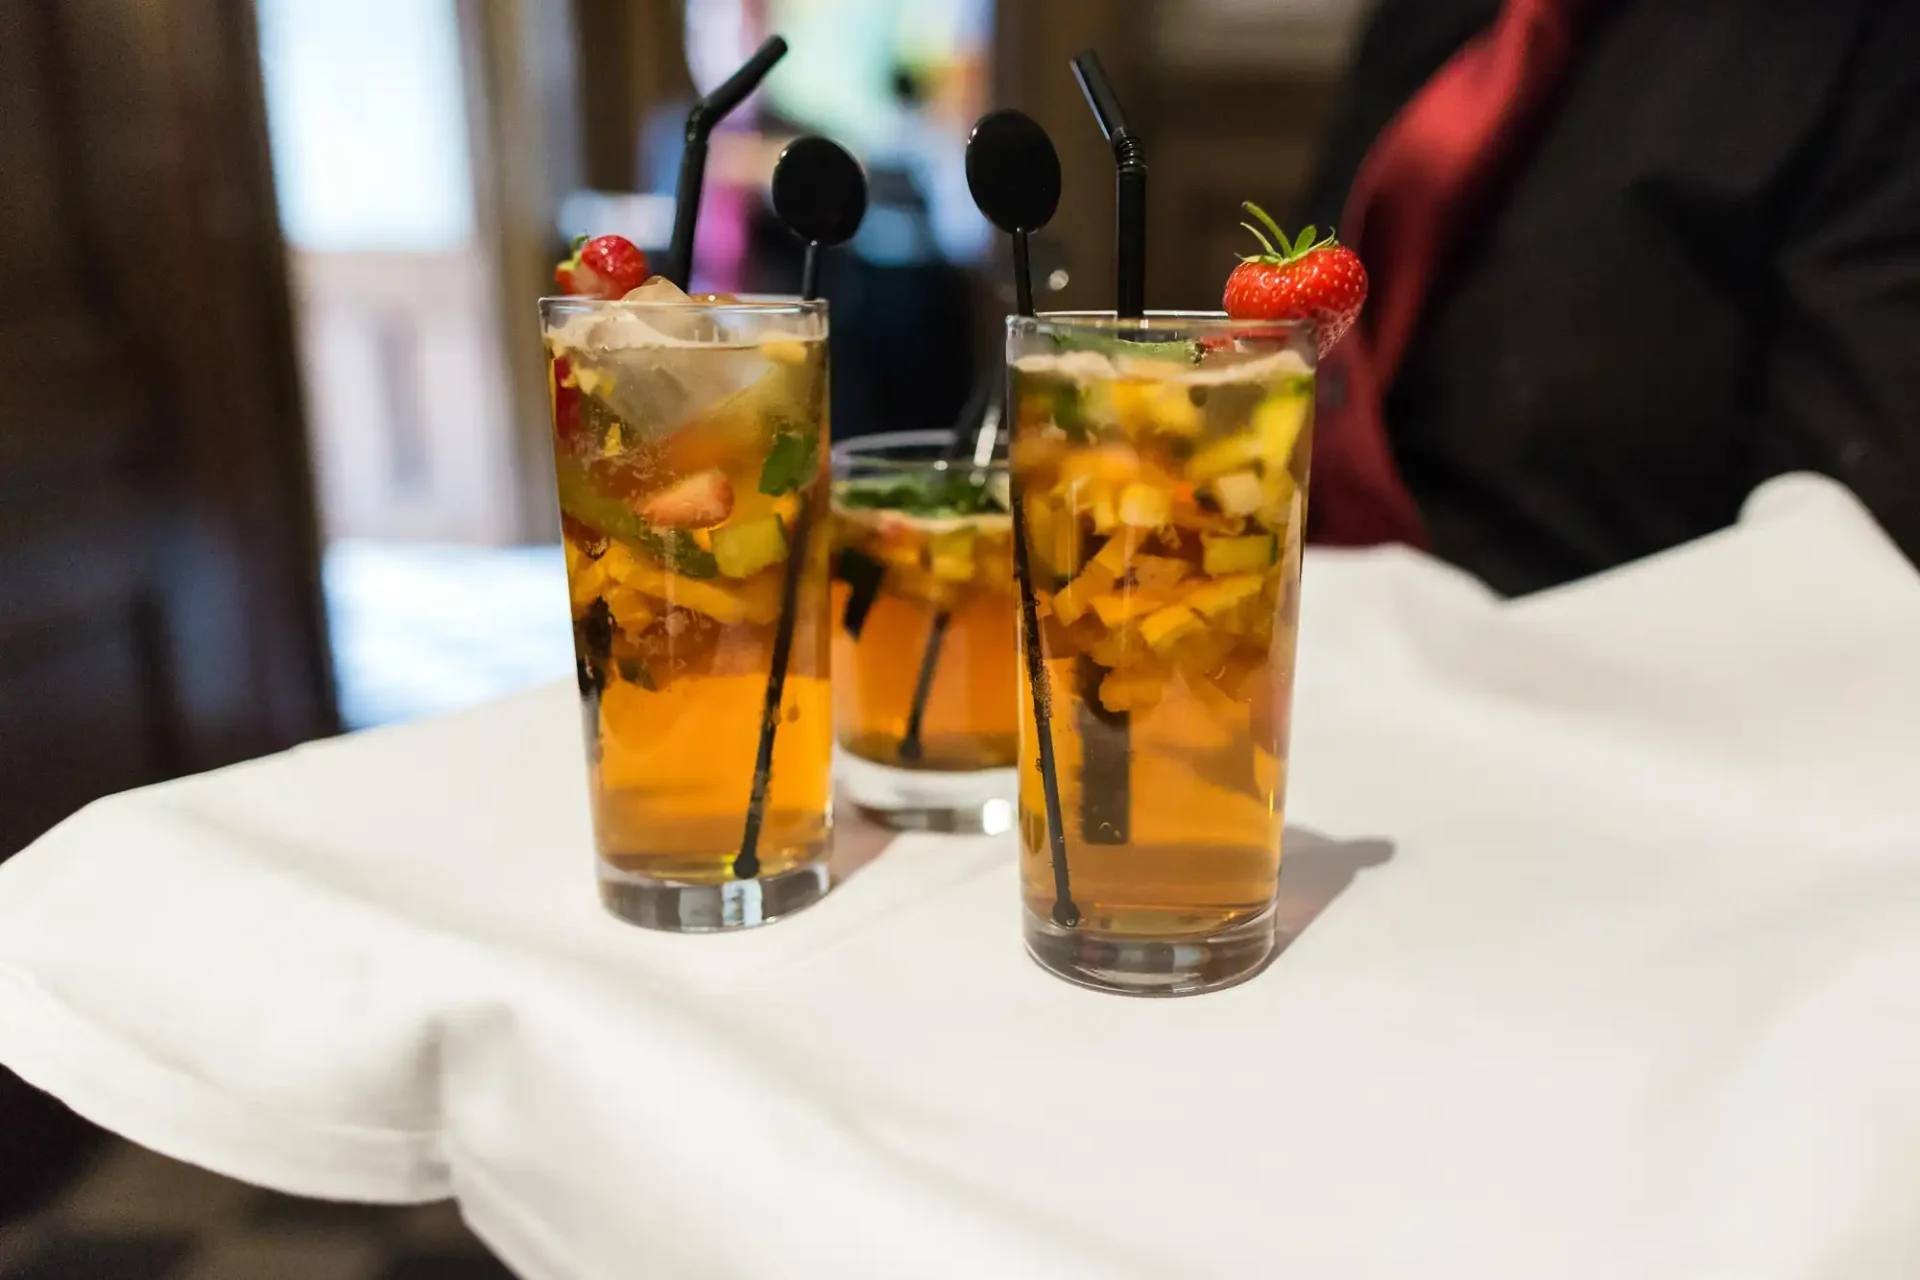 Two glasses of fruit-infused iced tea garnished with strawberries and herbs, served on a white tablecloth.